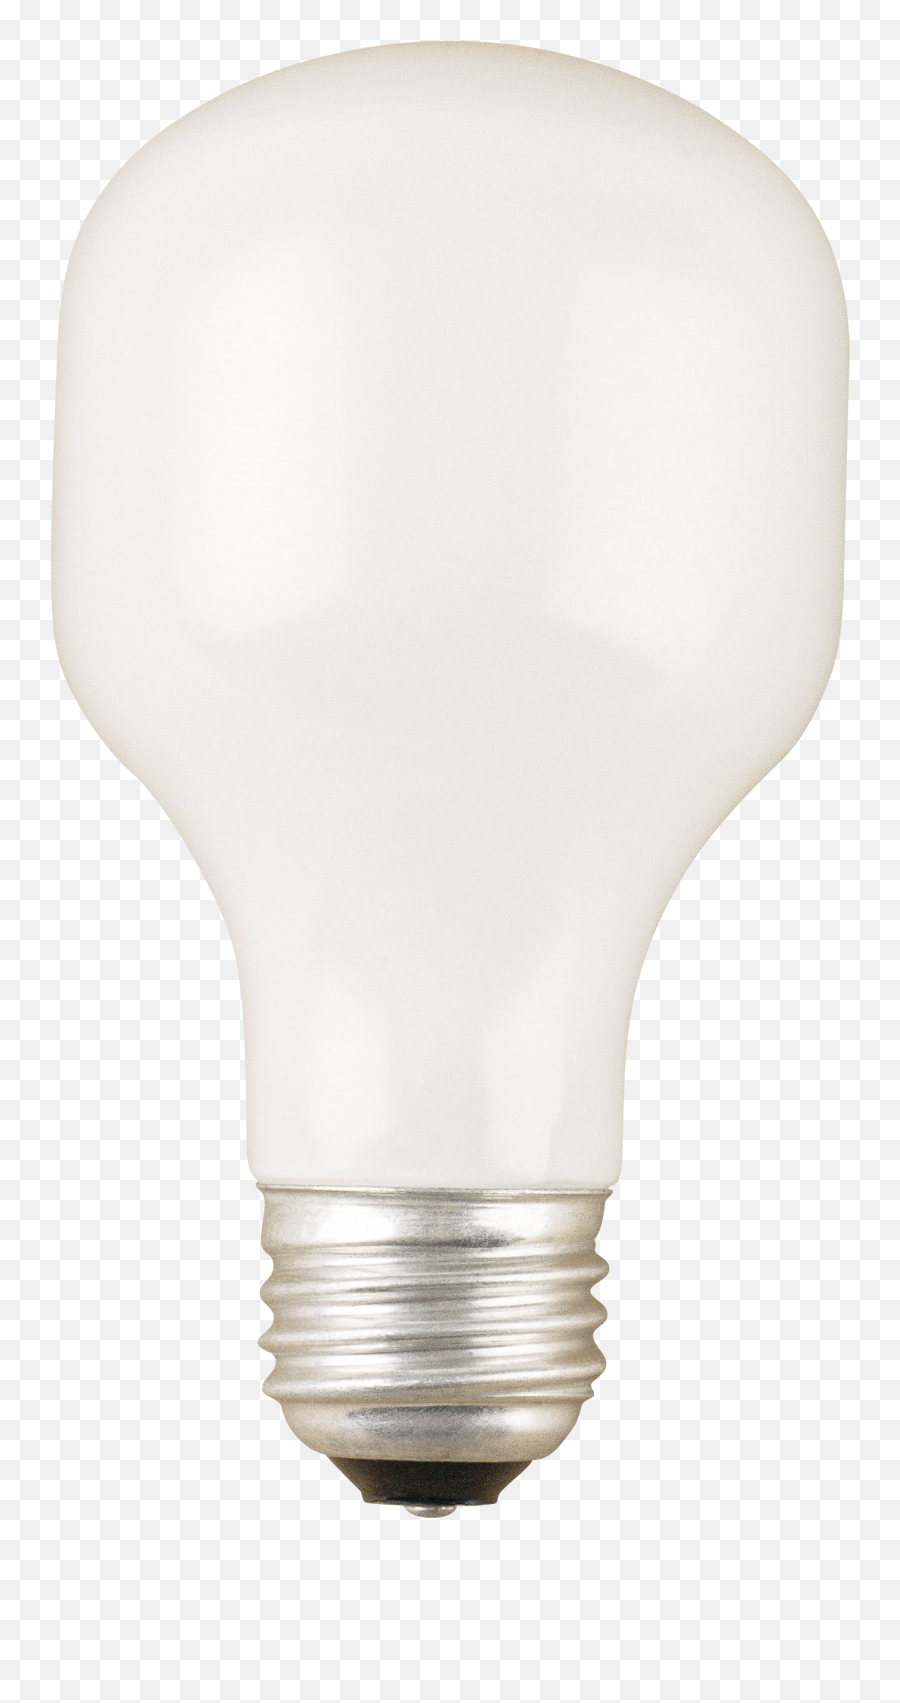 24 Lamp Png Images For Free Download - Lampshade,Lantern Png